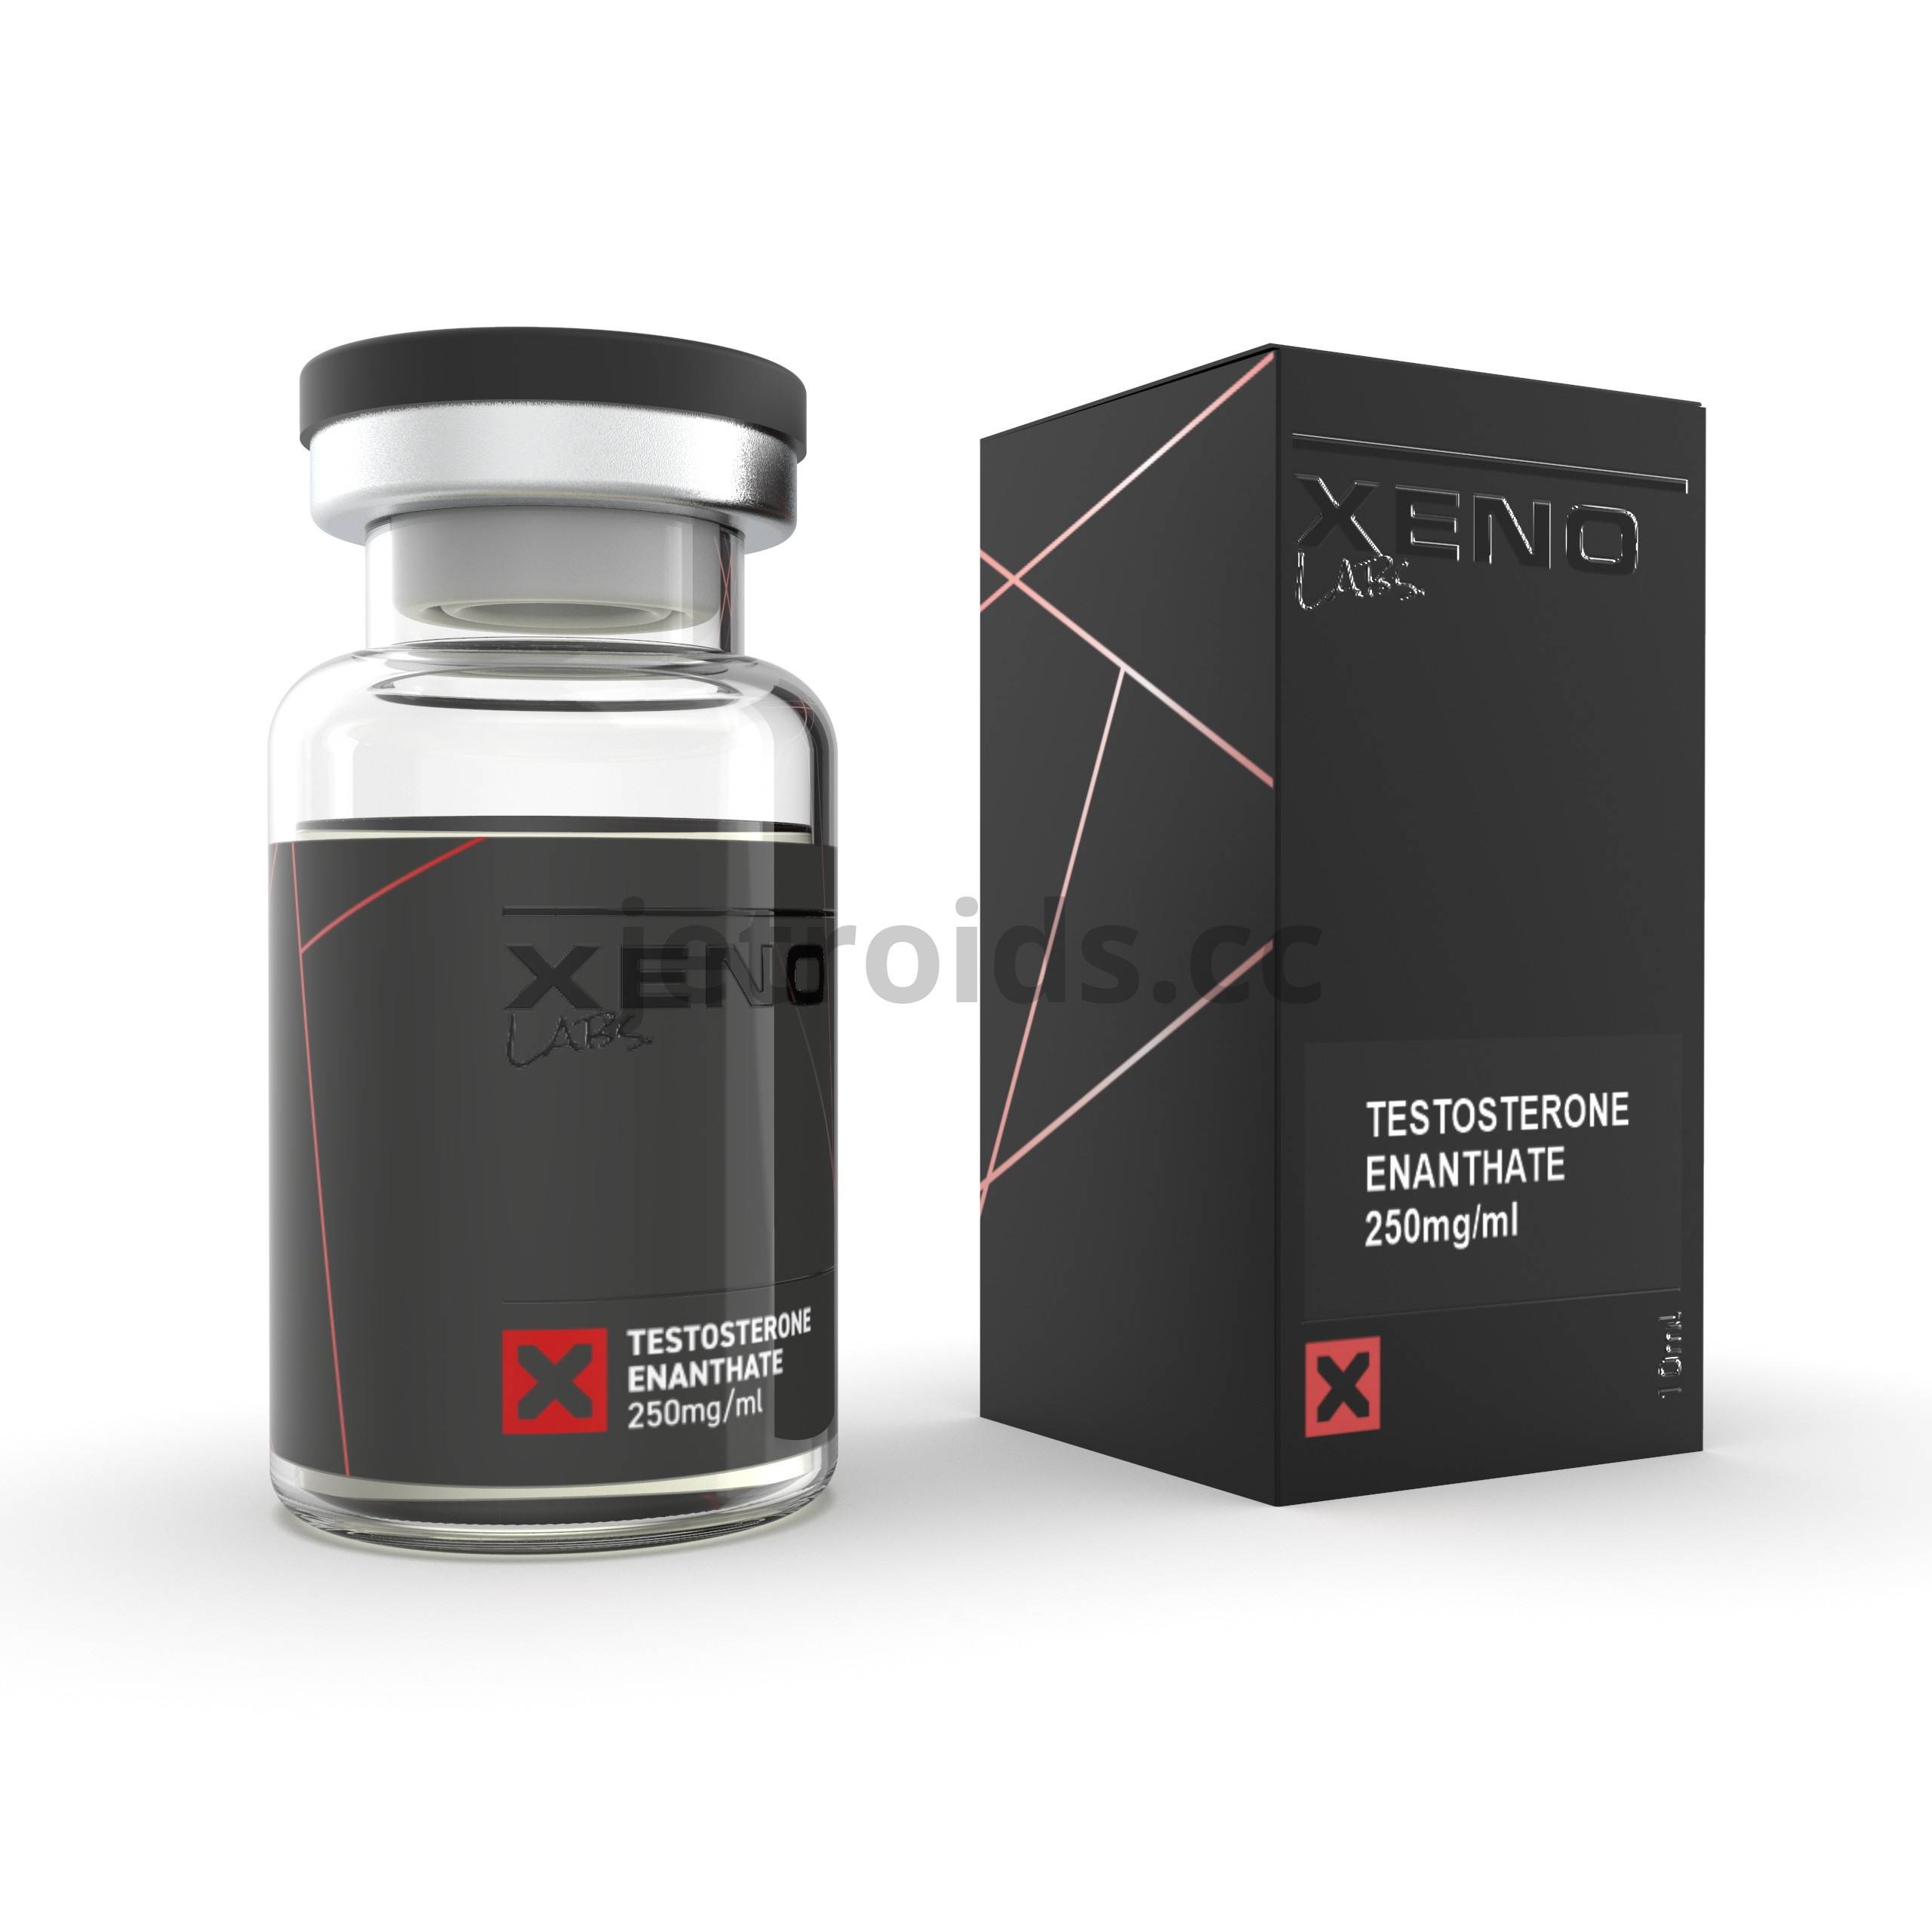 Xeno Labs - US Testosterone Enanthate 250 Product Info